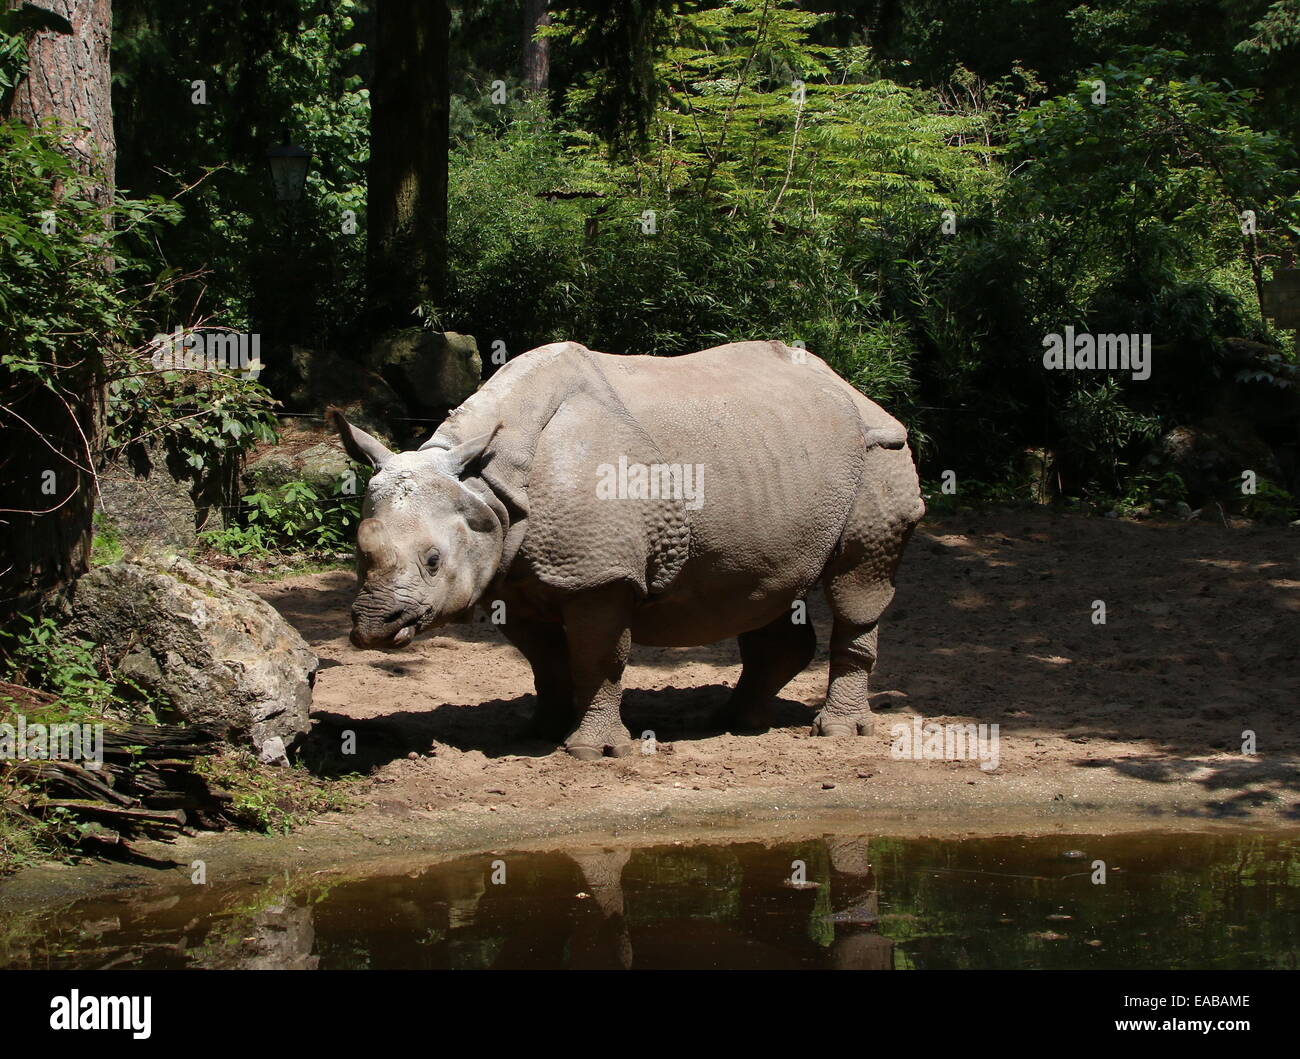 Greater one-horned Indian rhinoceros ( Rhinoceros unicornis) in a natural forest setting Stock Photo